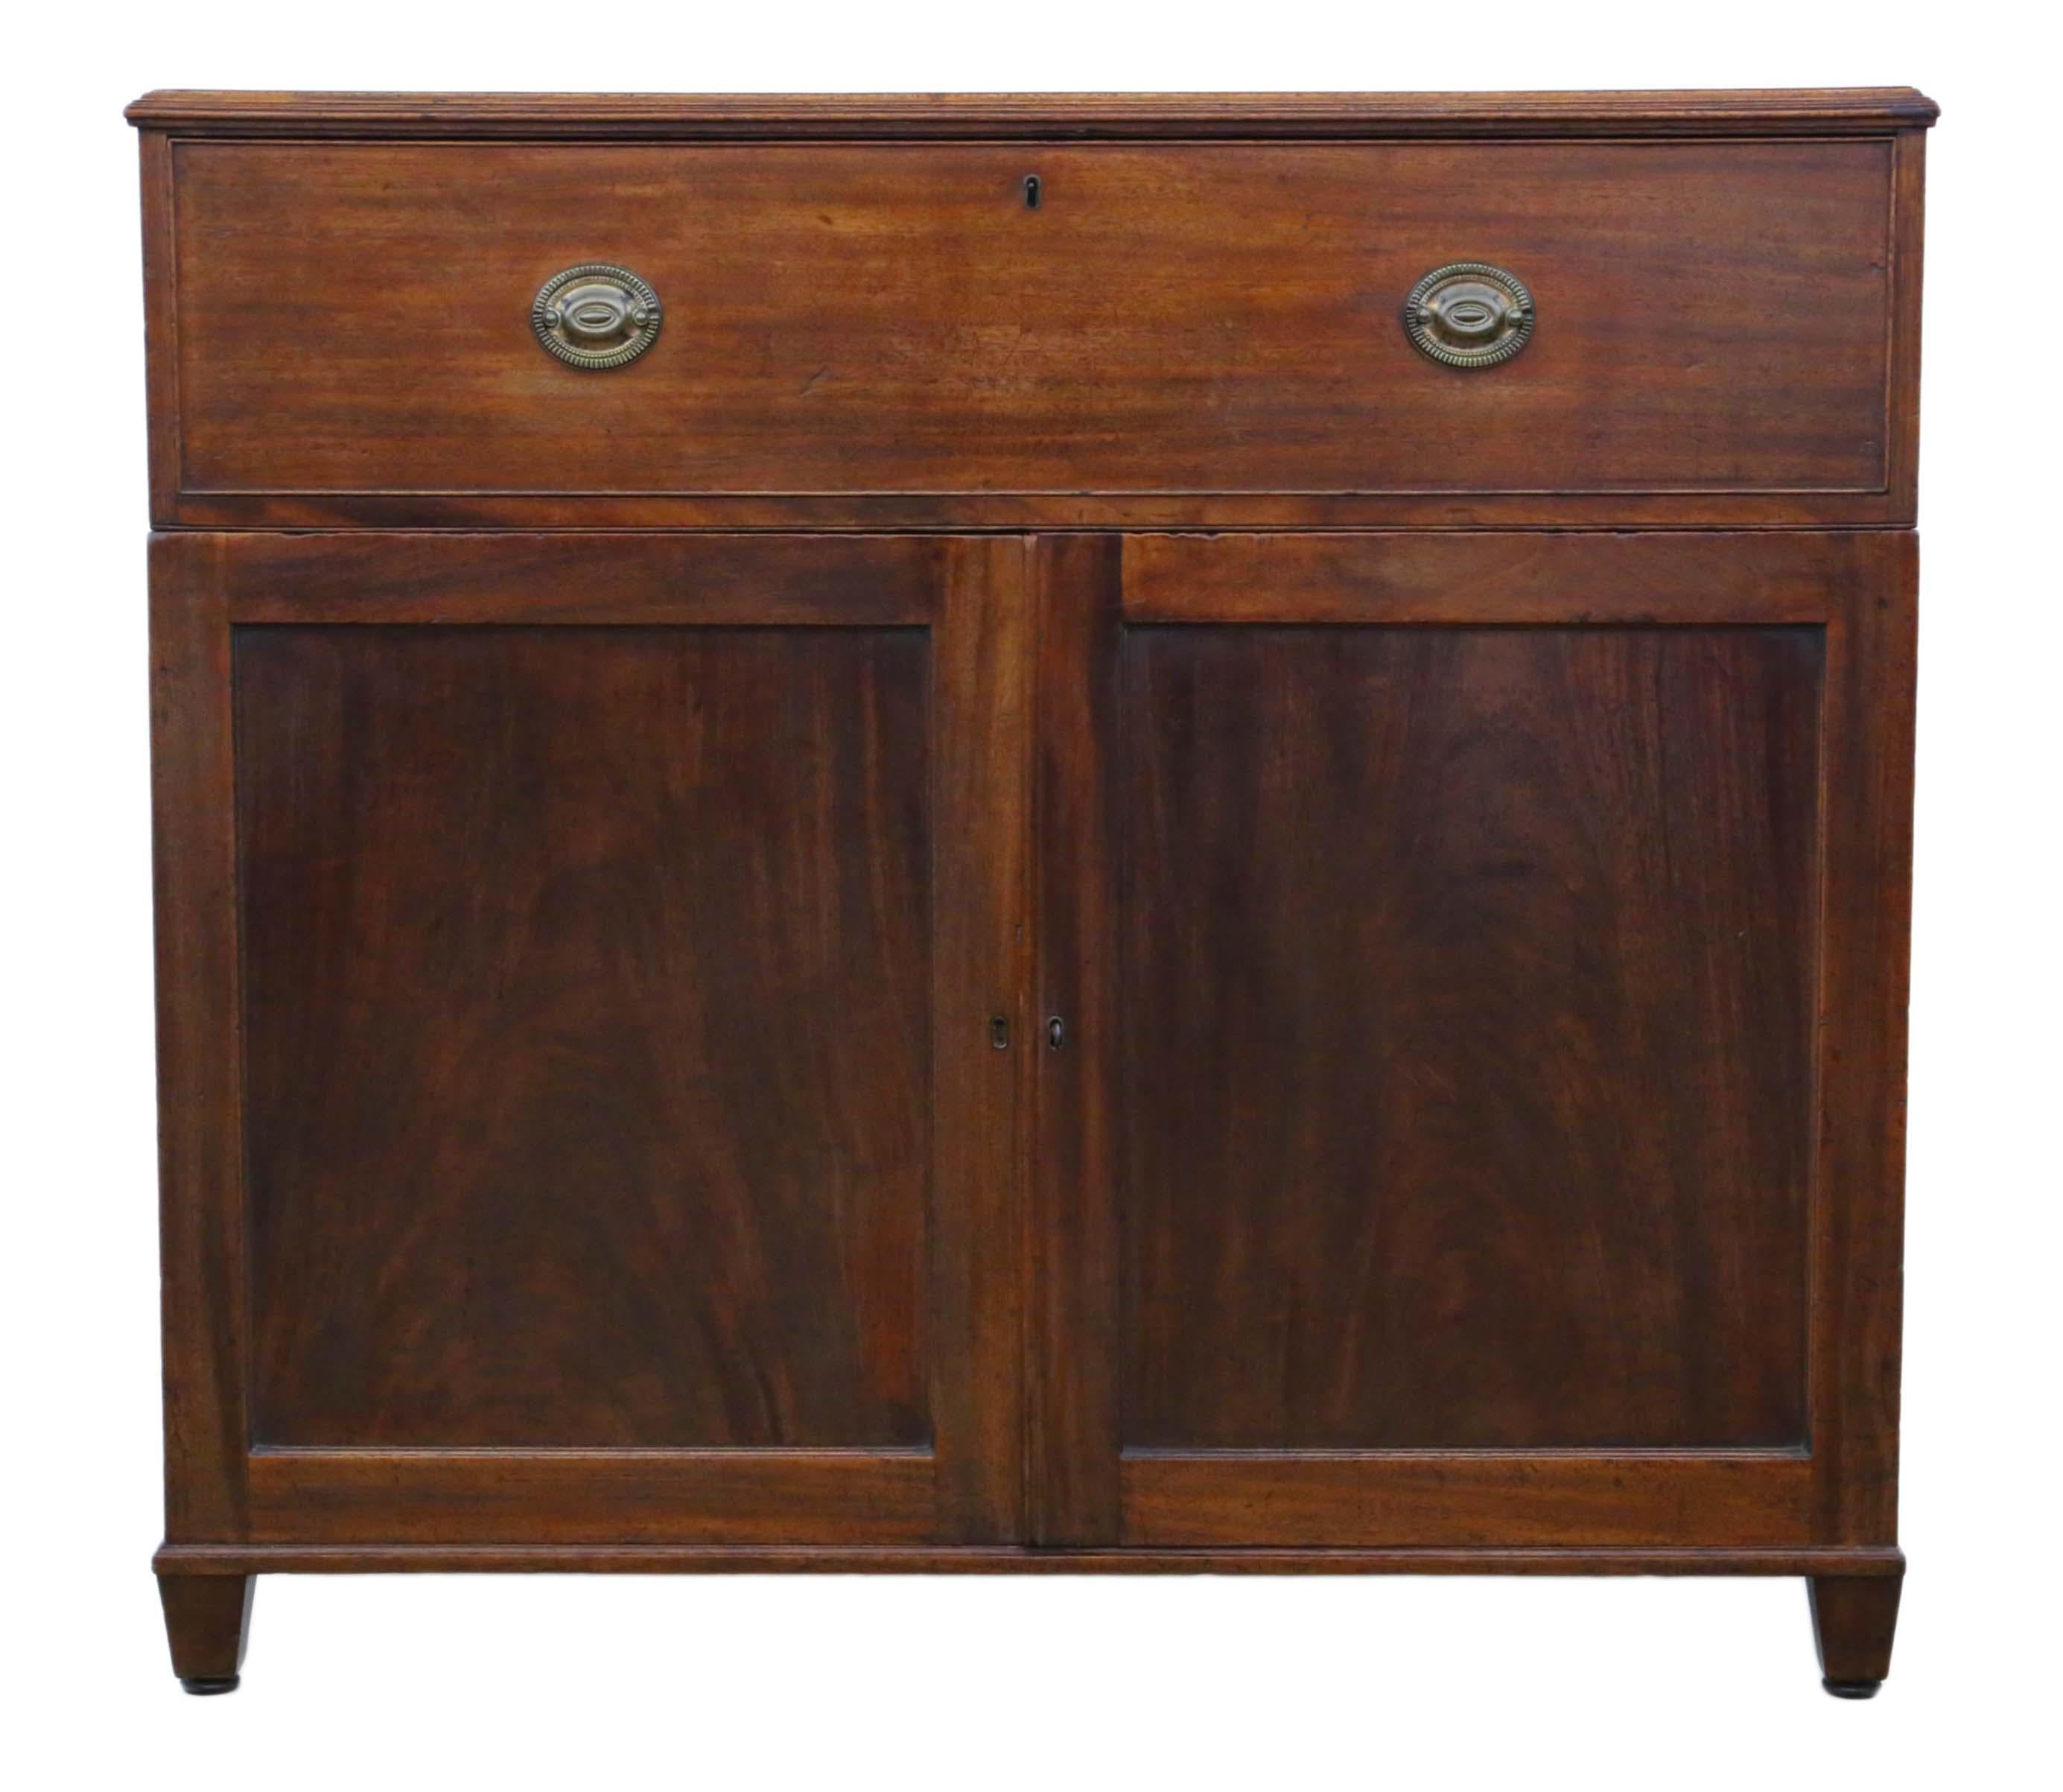 Antique quality 19th Century mahogany campaign chest of drawers. Original handles.

No loose joints or woodworm and the oak lined drawers slide freely. Separates into 2 parts for transport.
 
Overall maximum dimensions: 117cmW x 47cmD x